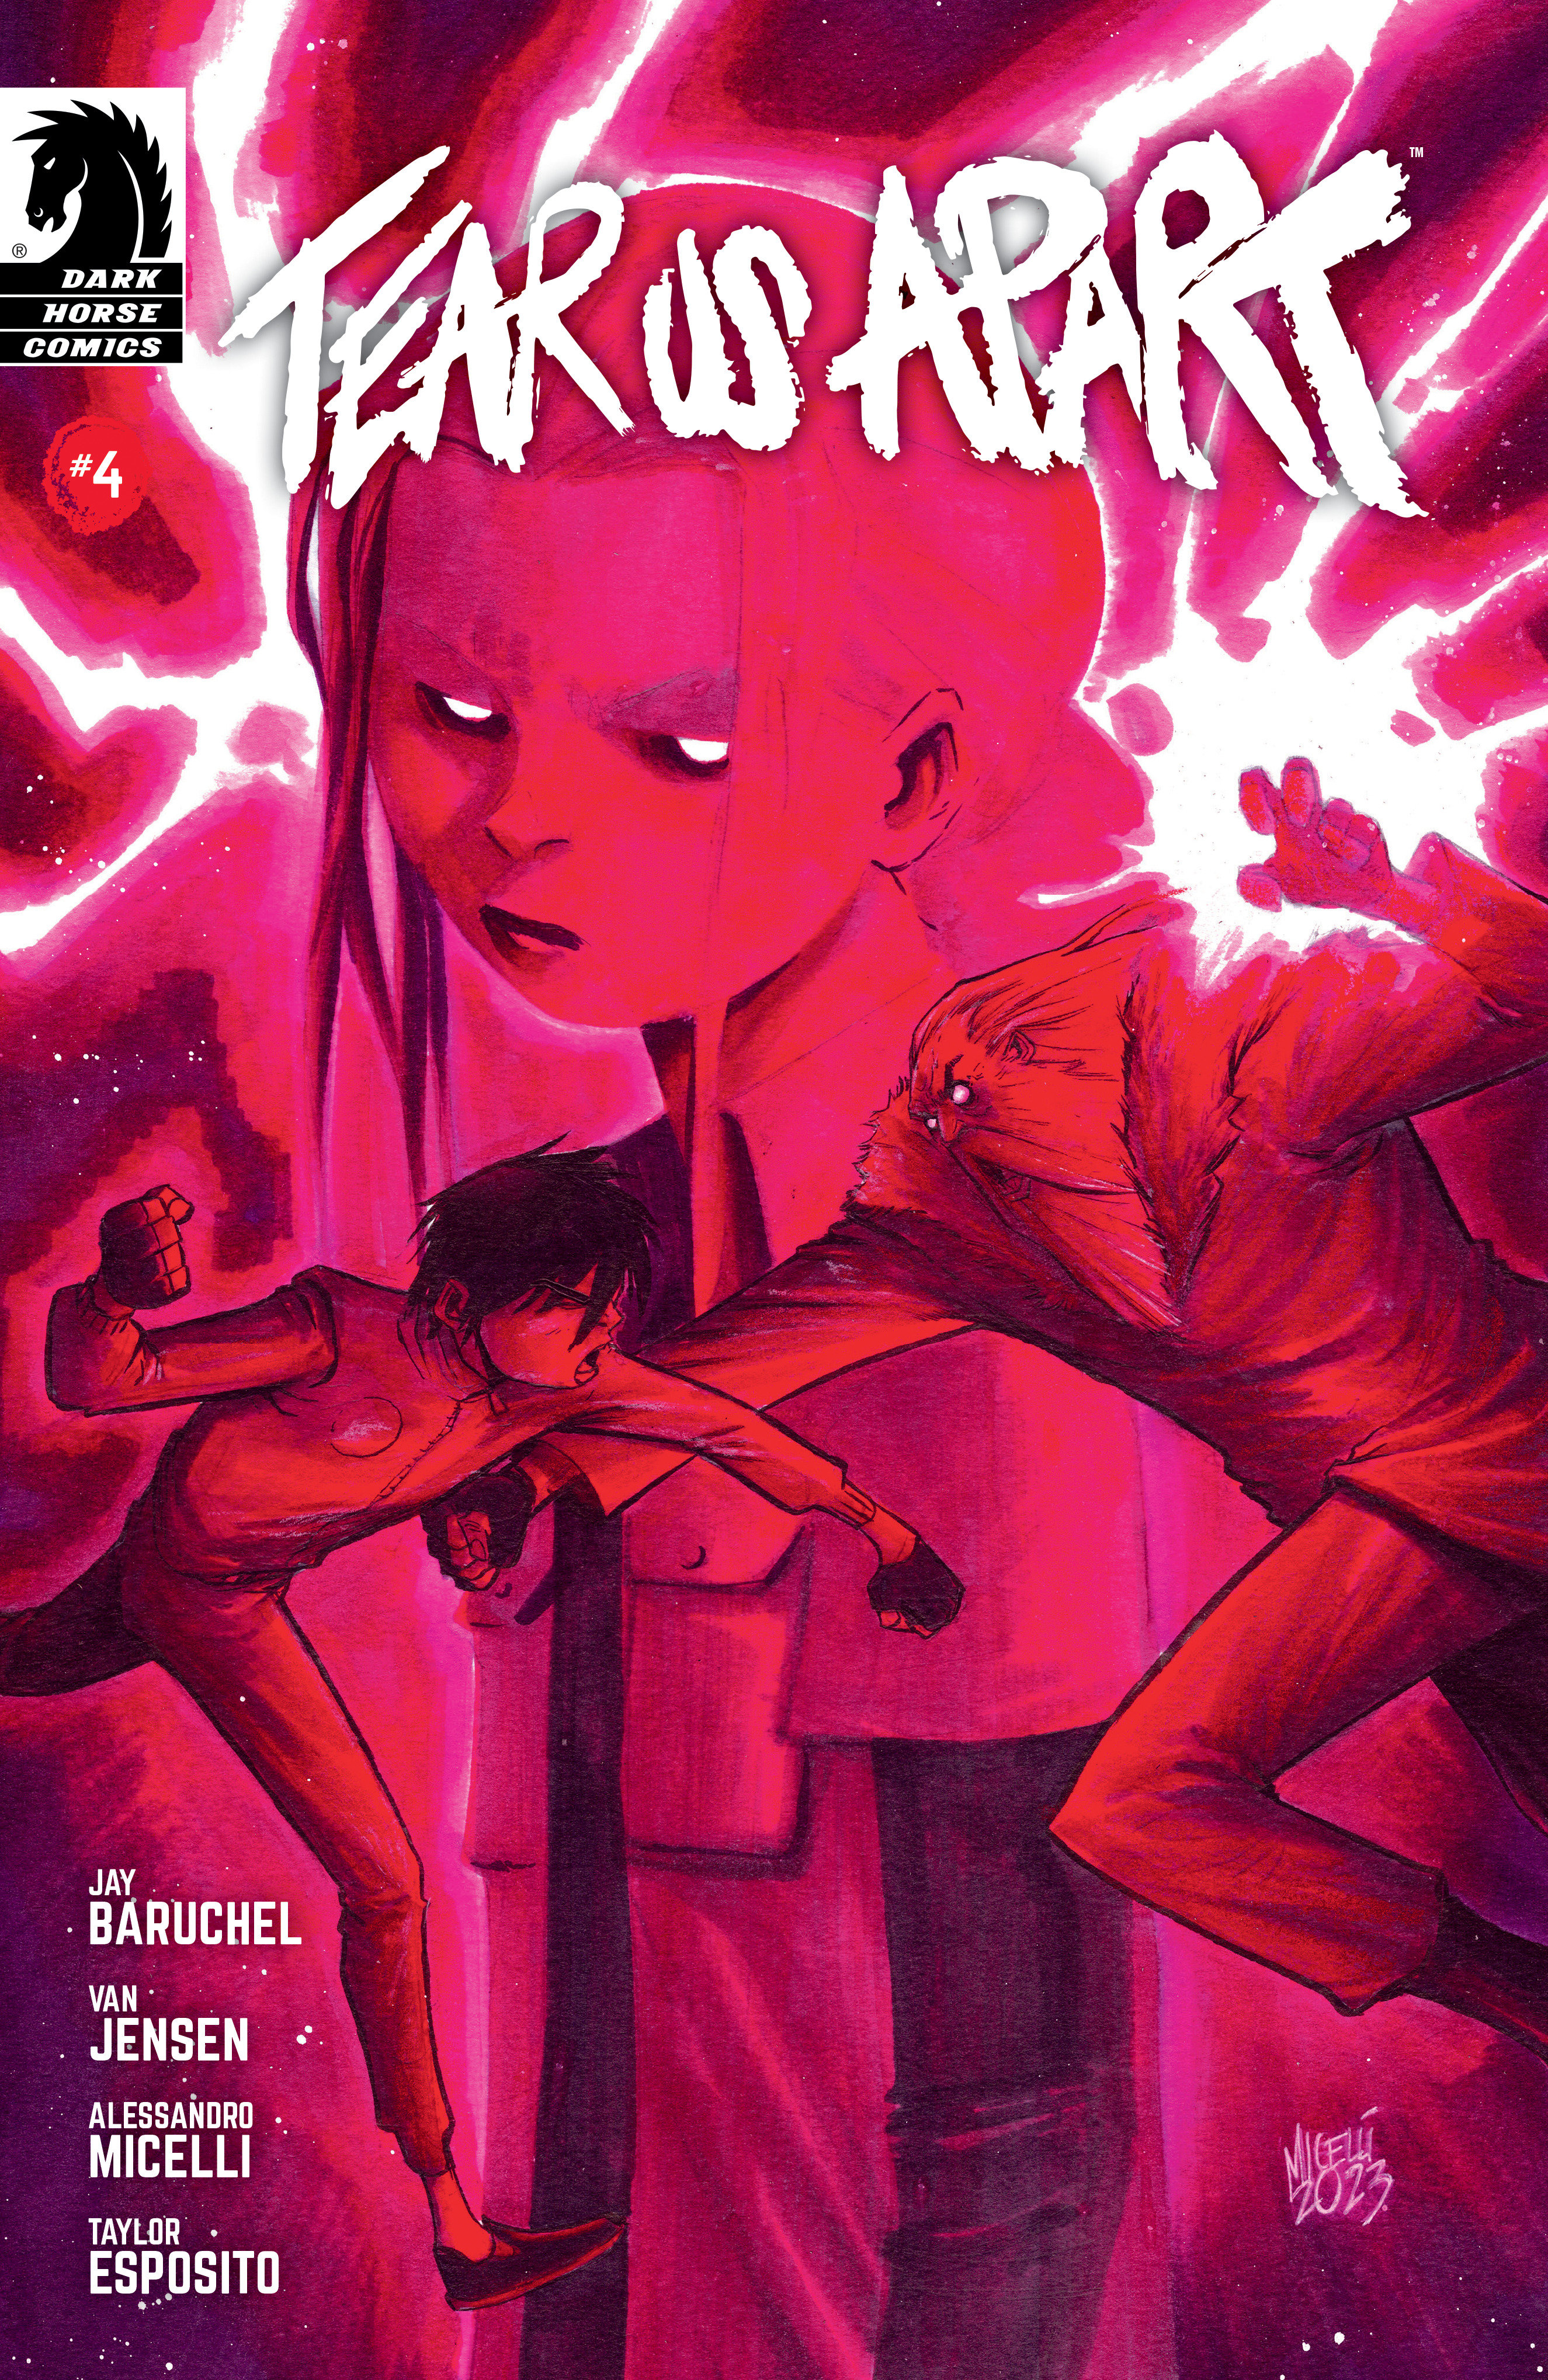 Tear Us Apart #4 Cover A (Alessandro Micelli)